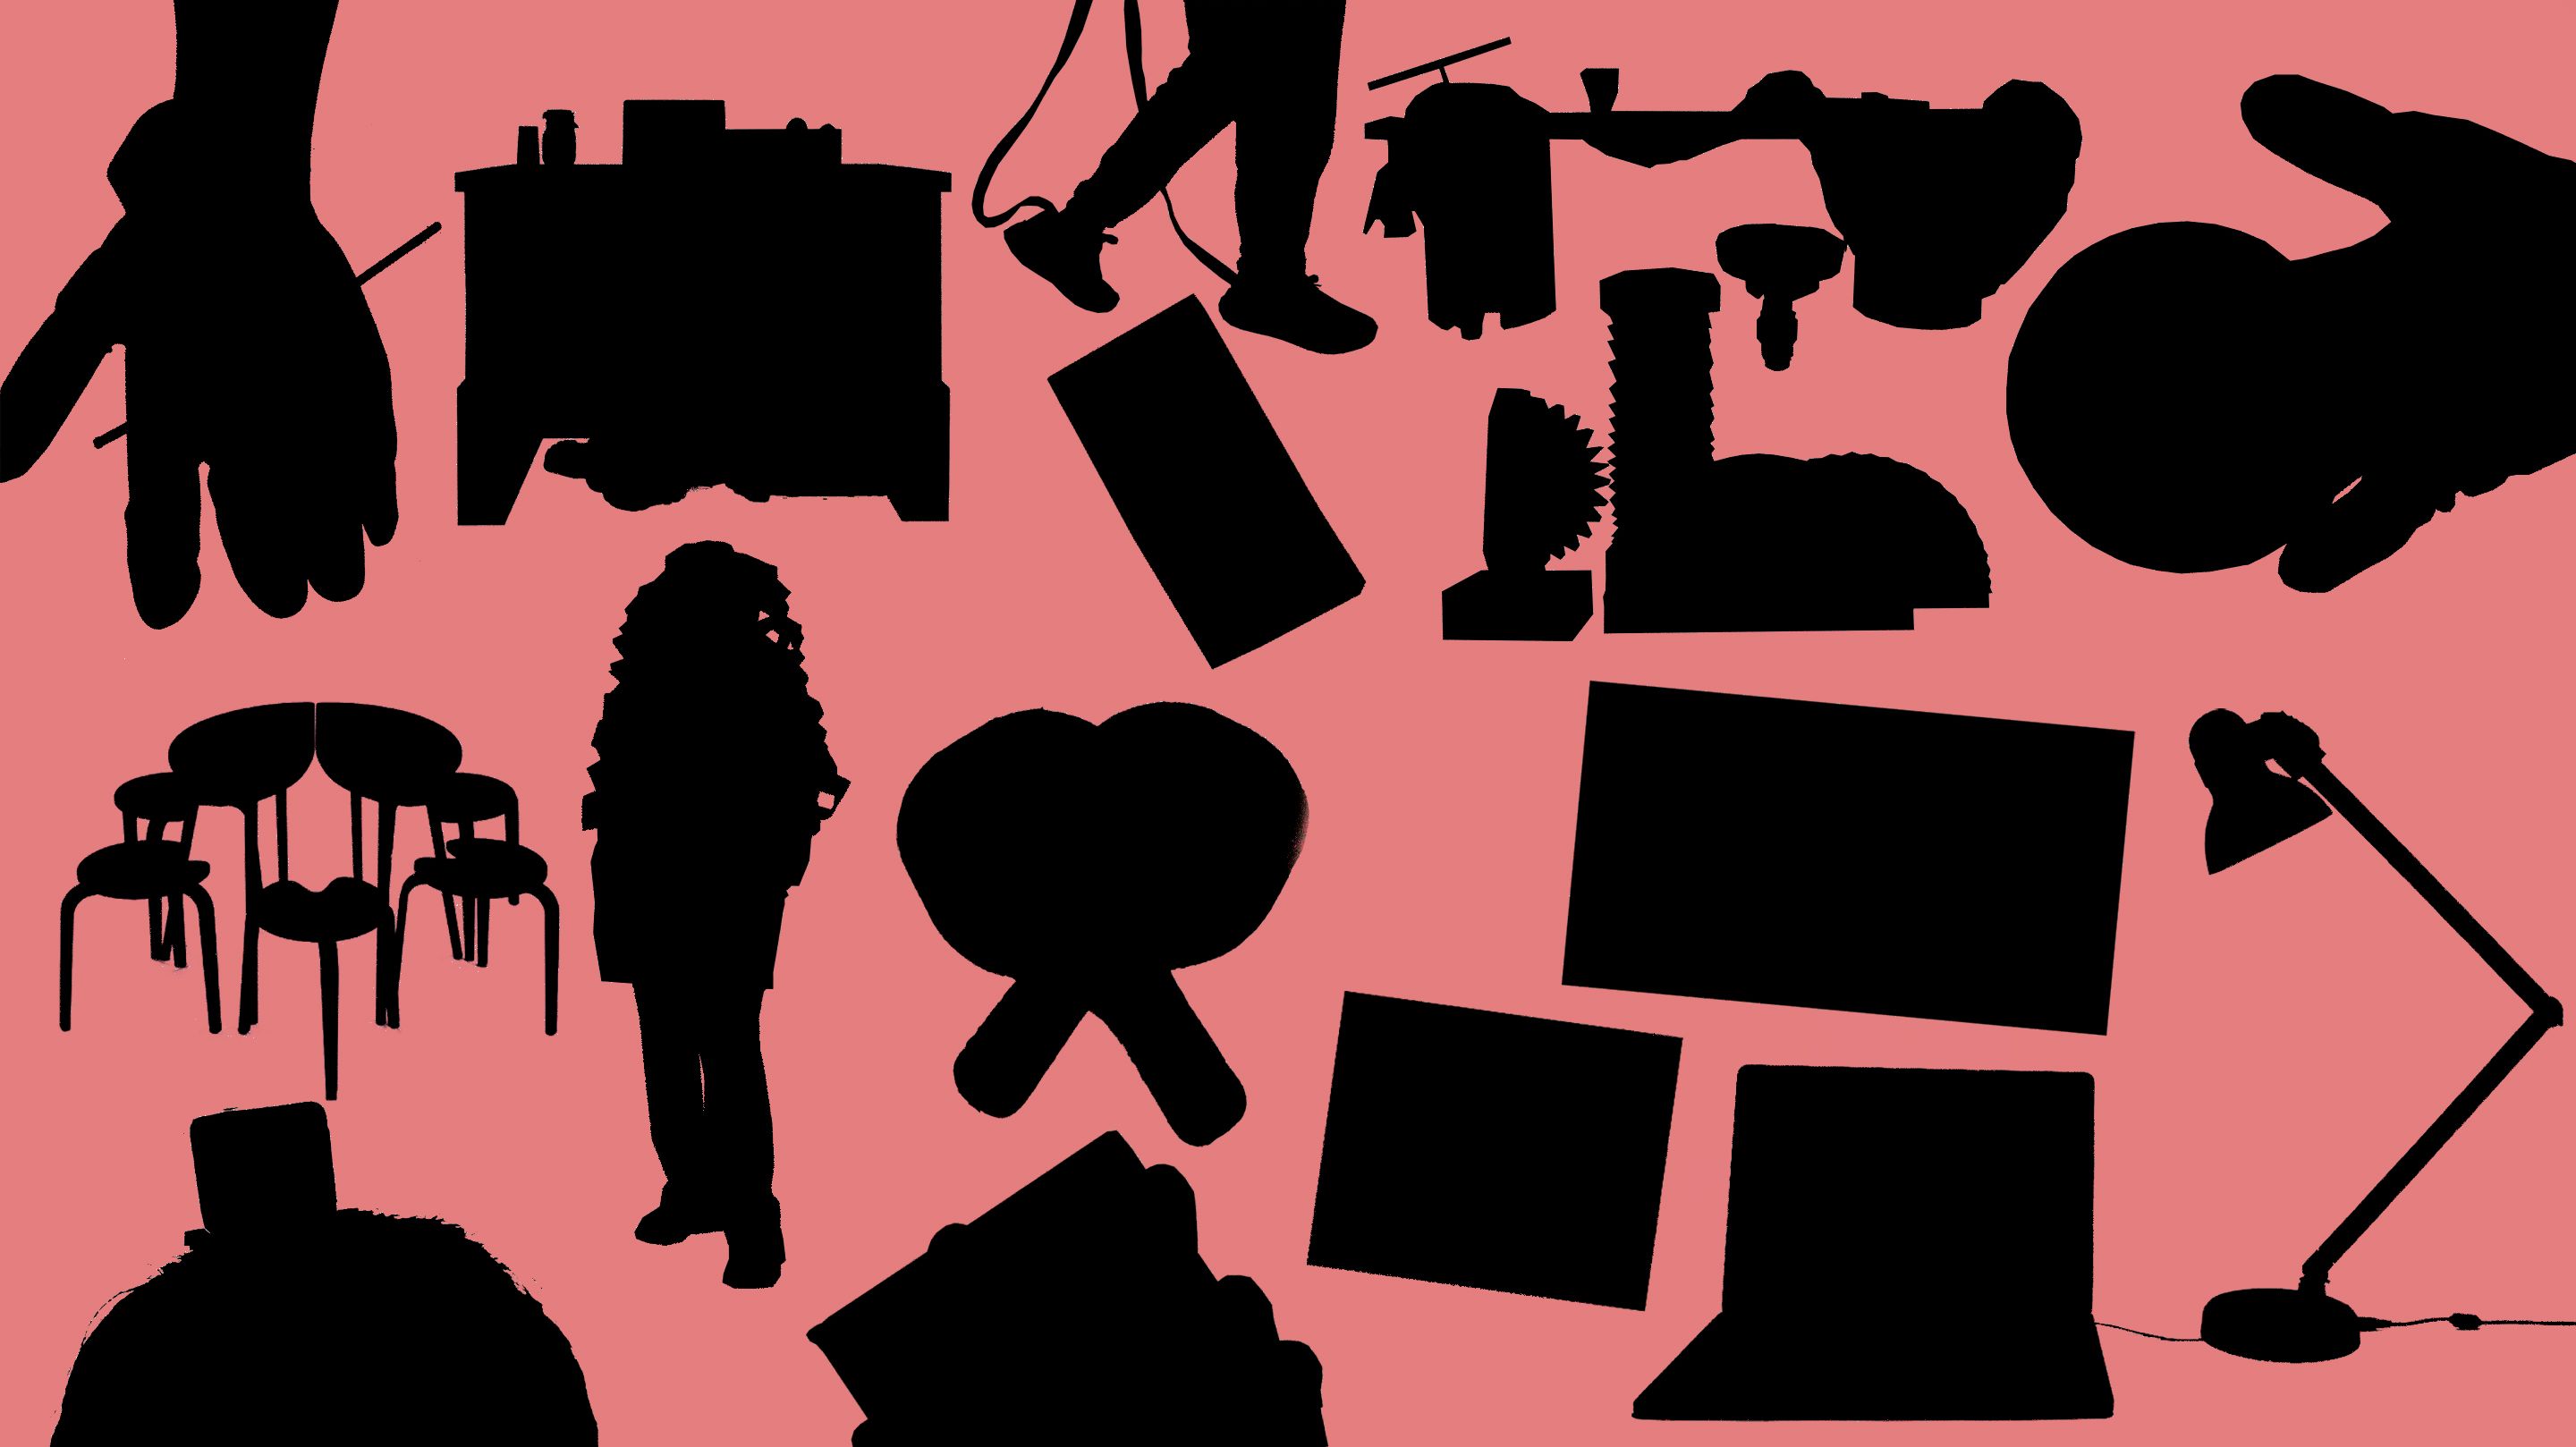  Numerous black silhouettes of people and objects, including a desk lamp and an open laptop, on a salmon pink background